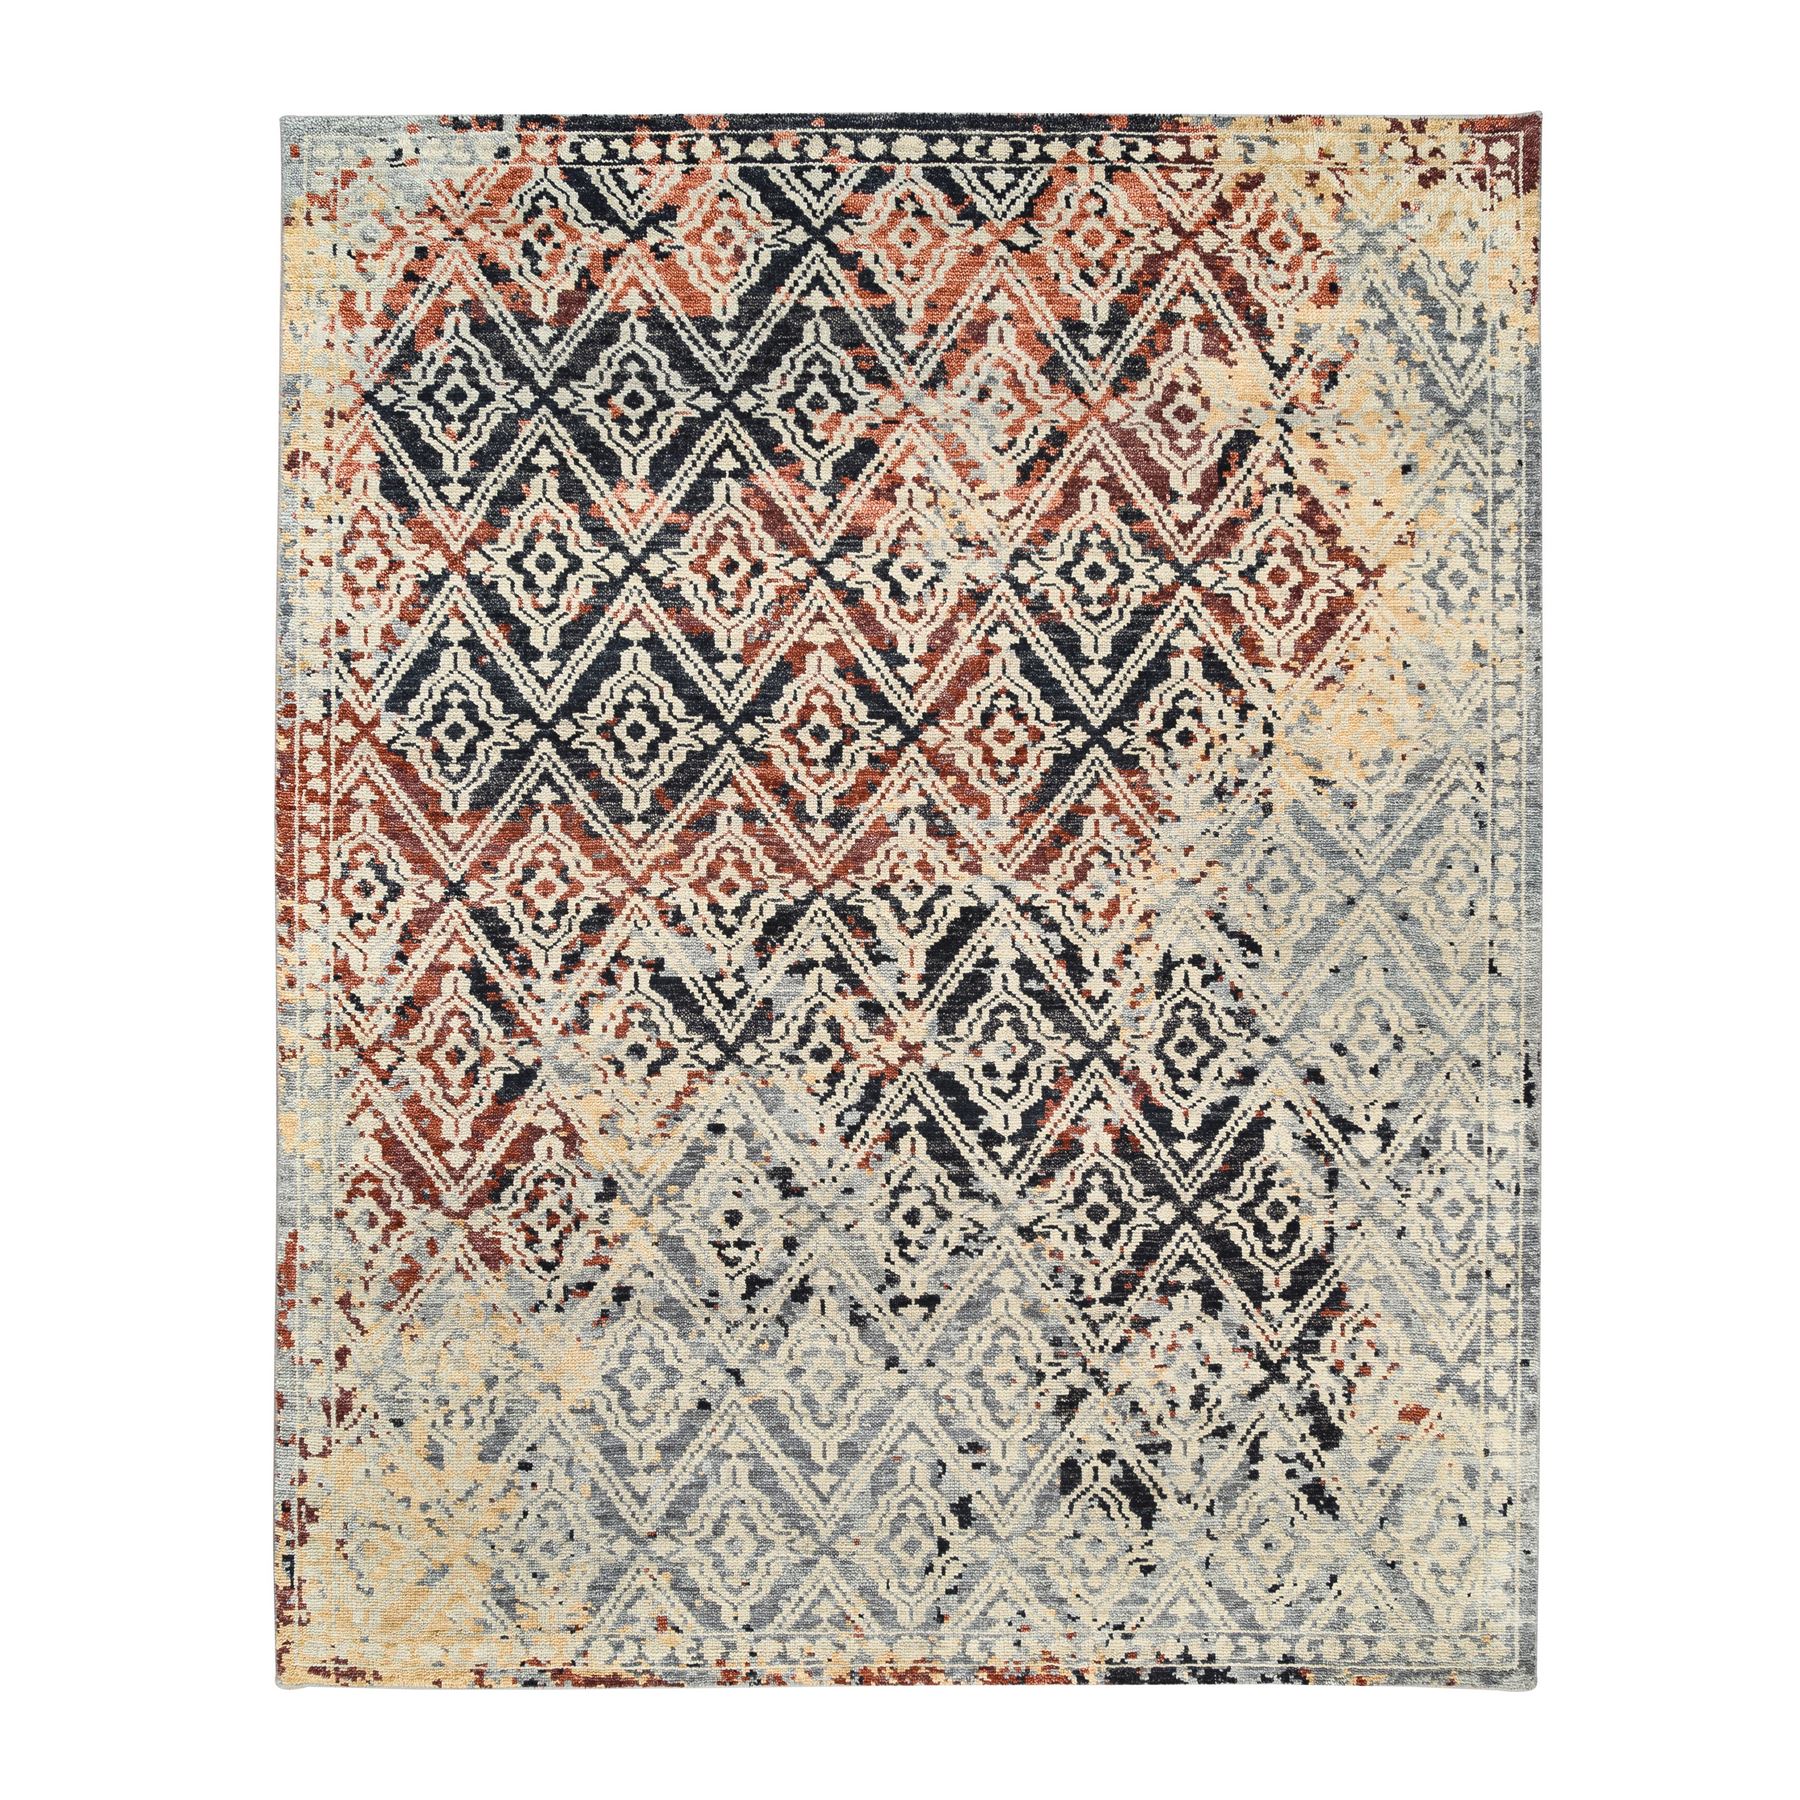 Nomadic And Village Collection Hand Knotted Grey Rug No: 1125298